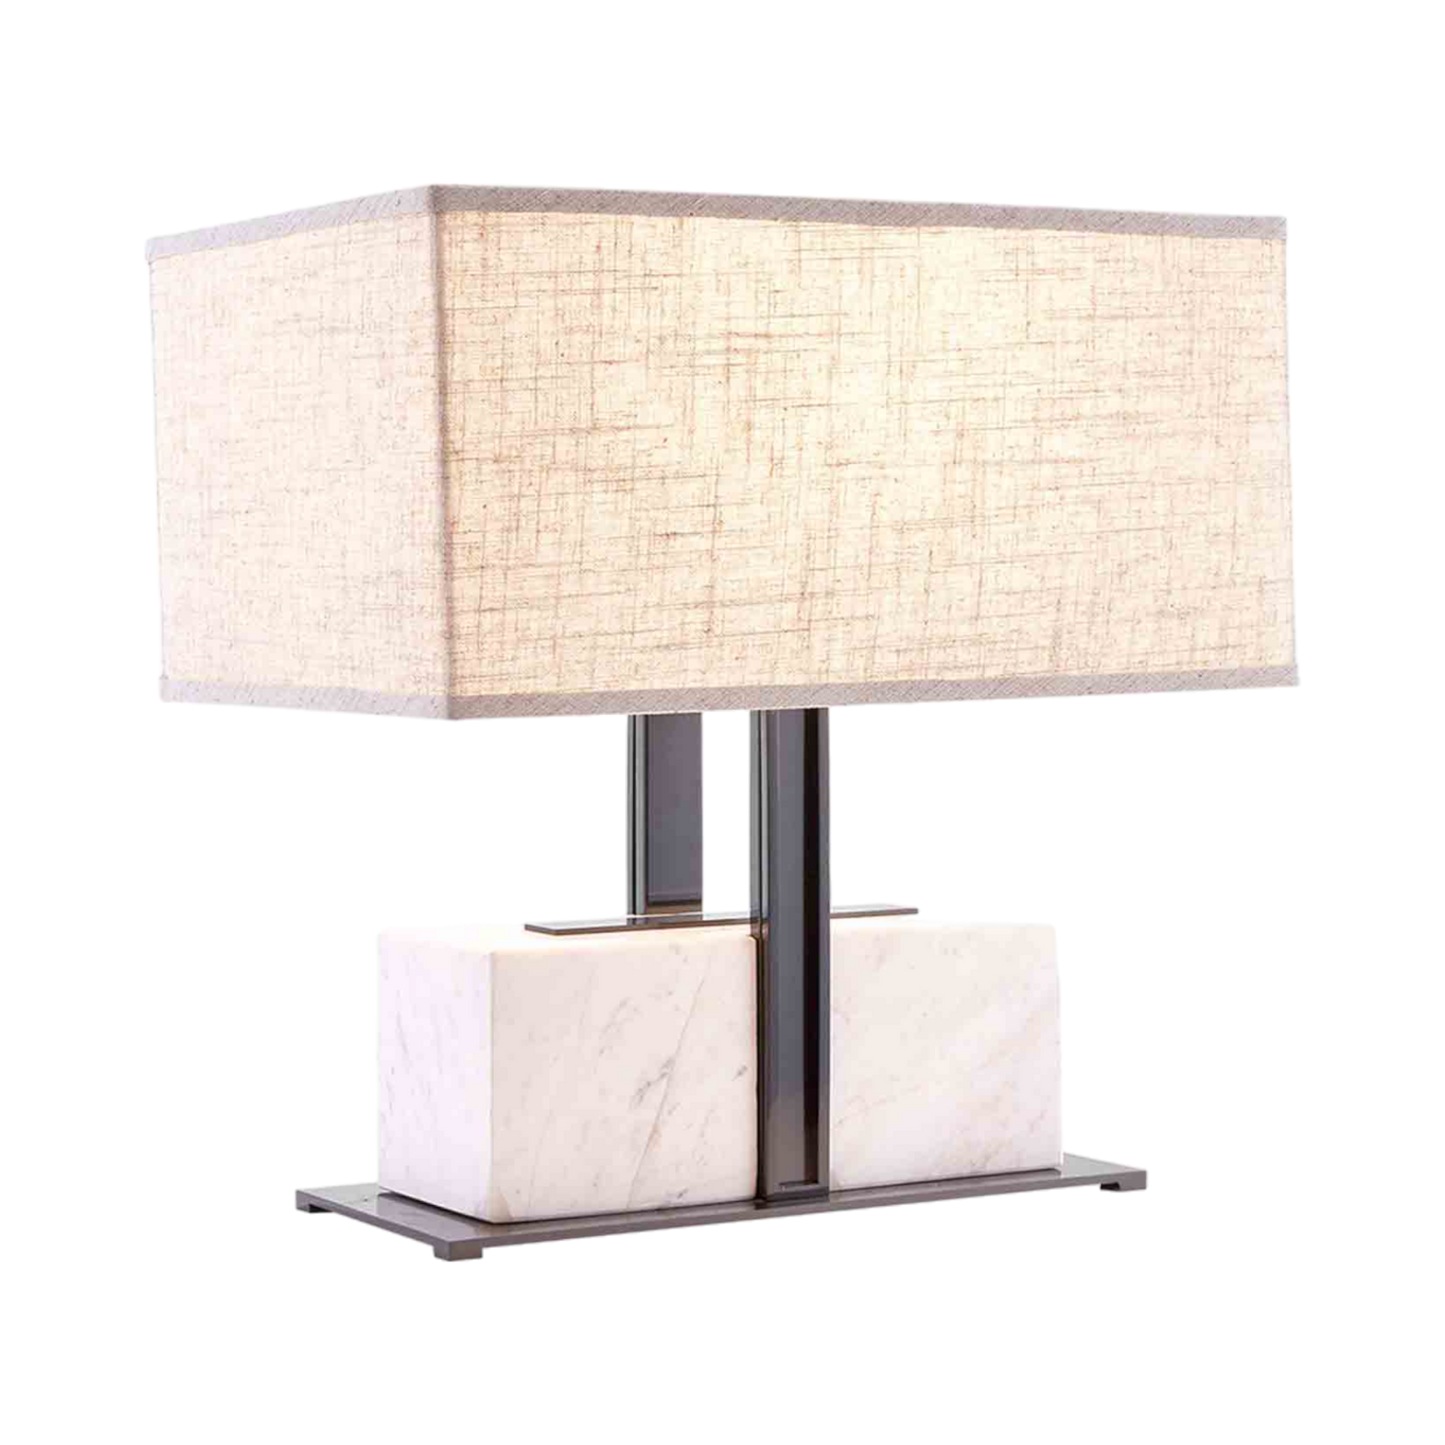 Rectangular Marble Lamp With Stainless Steel Base And Support With Shade  28X40X42